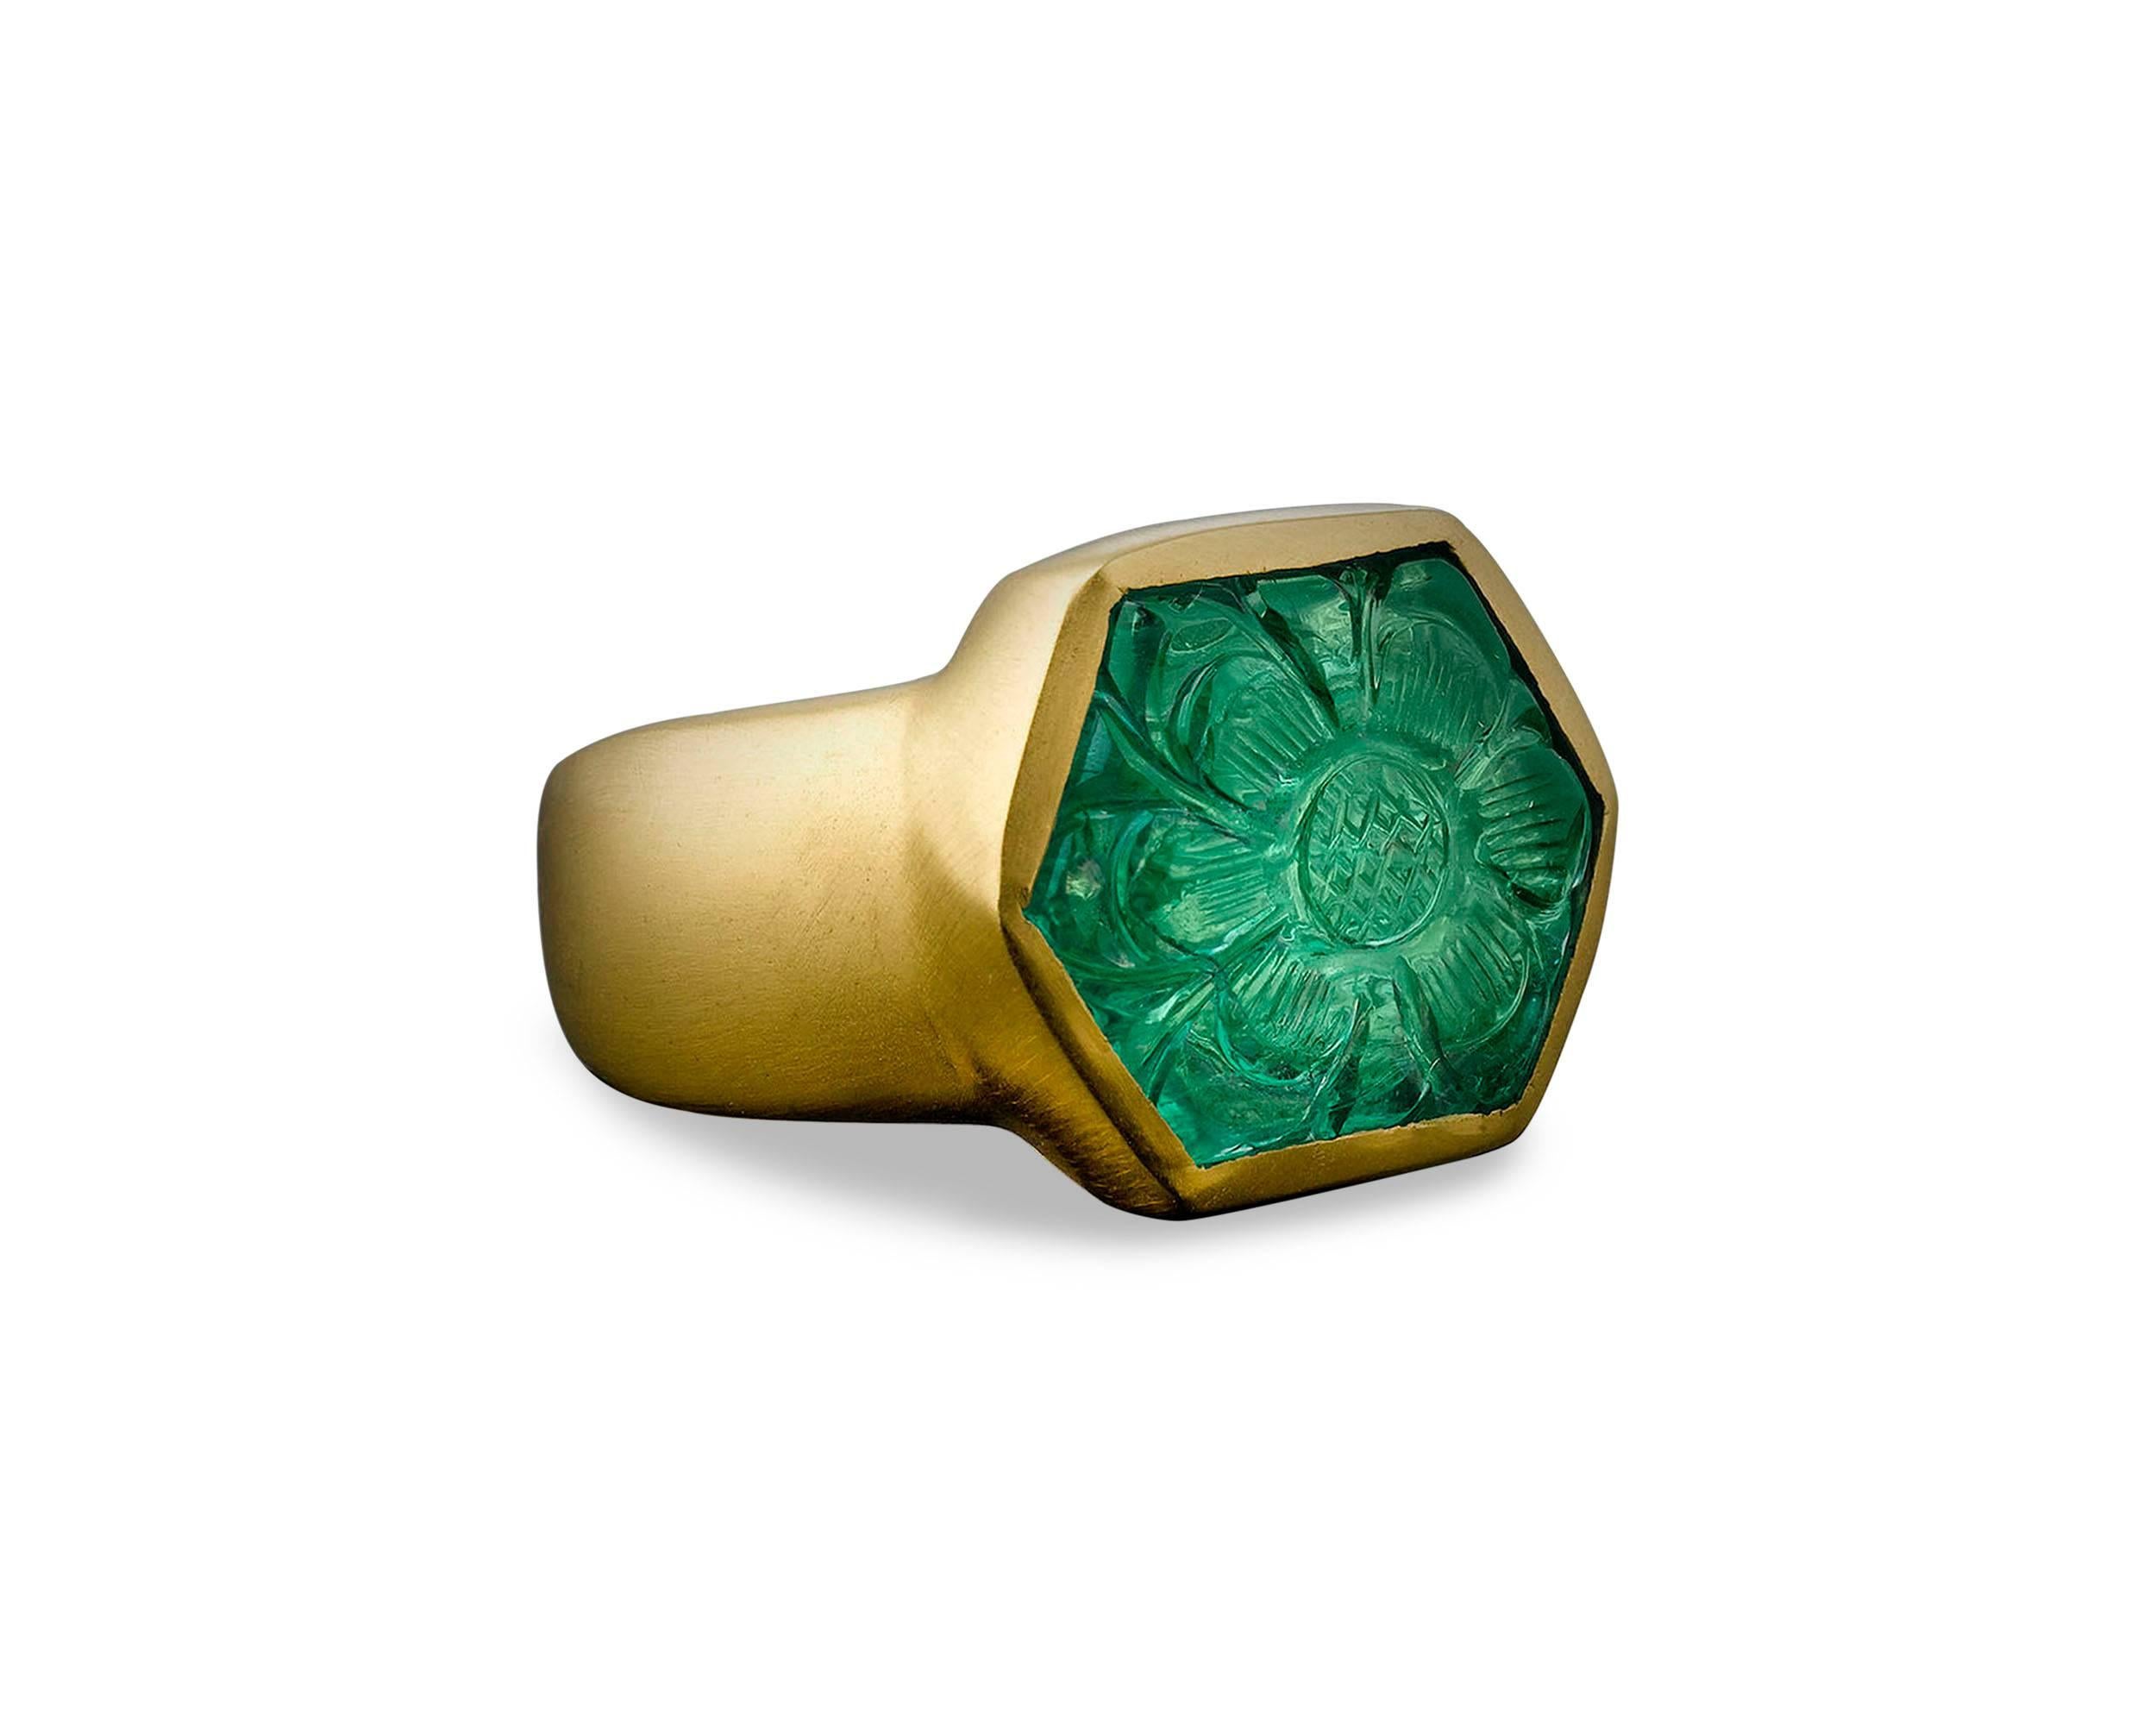 Carved in a rich floral design in the Mughal taste, this brilliant 11.85-carat Colombian emerald displays incredible transparency and color. This vibrant gem is bezel set in 22K yellow gold. This emerald’s flowery motif is consistent with those used